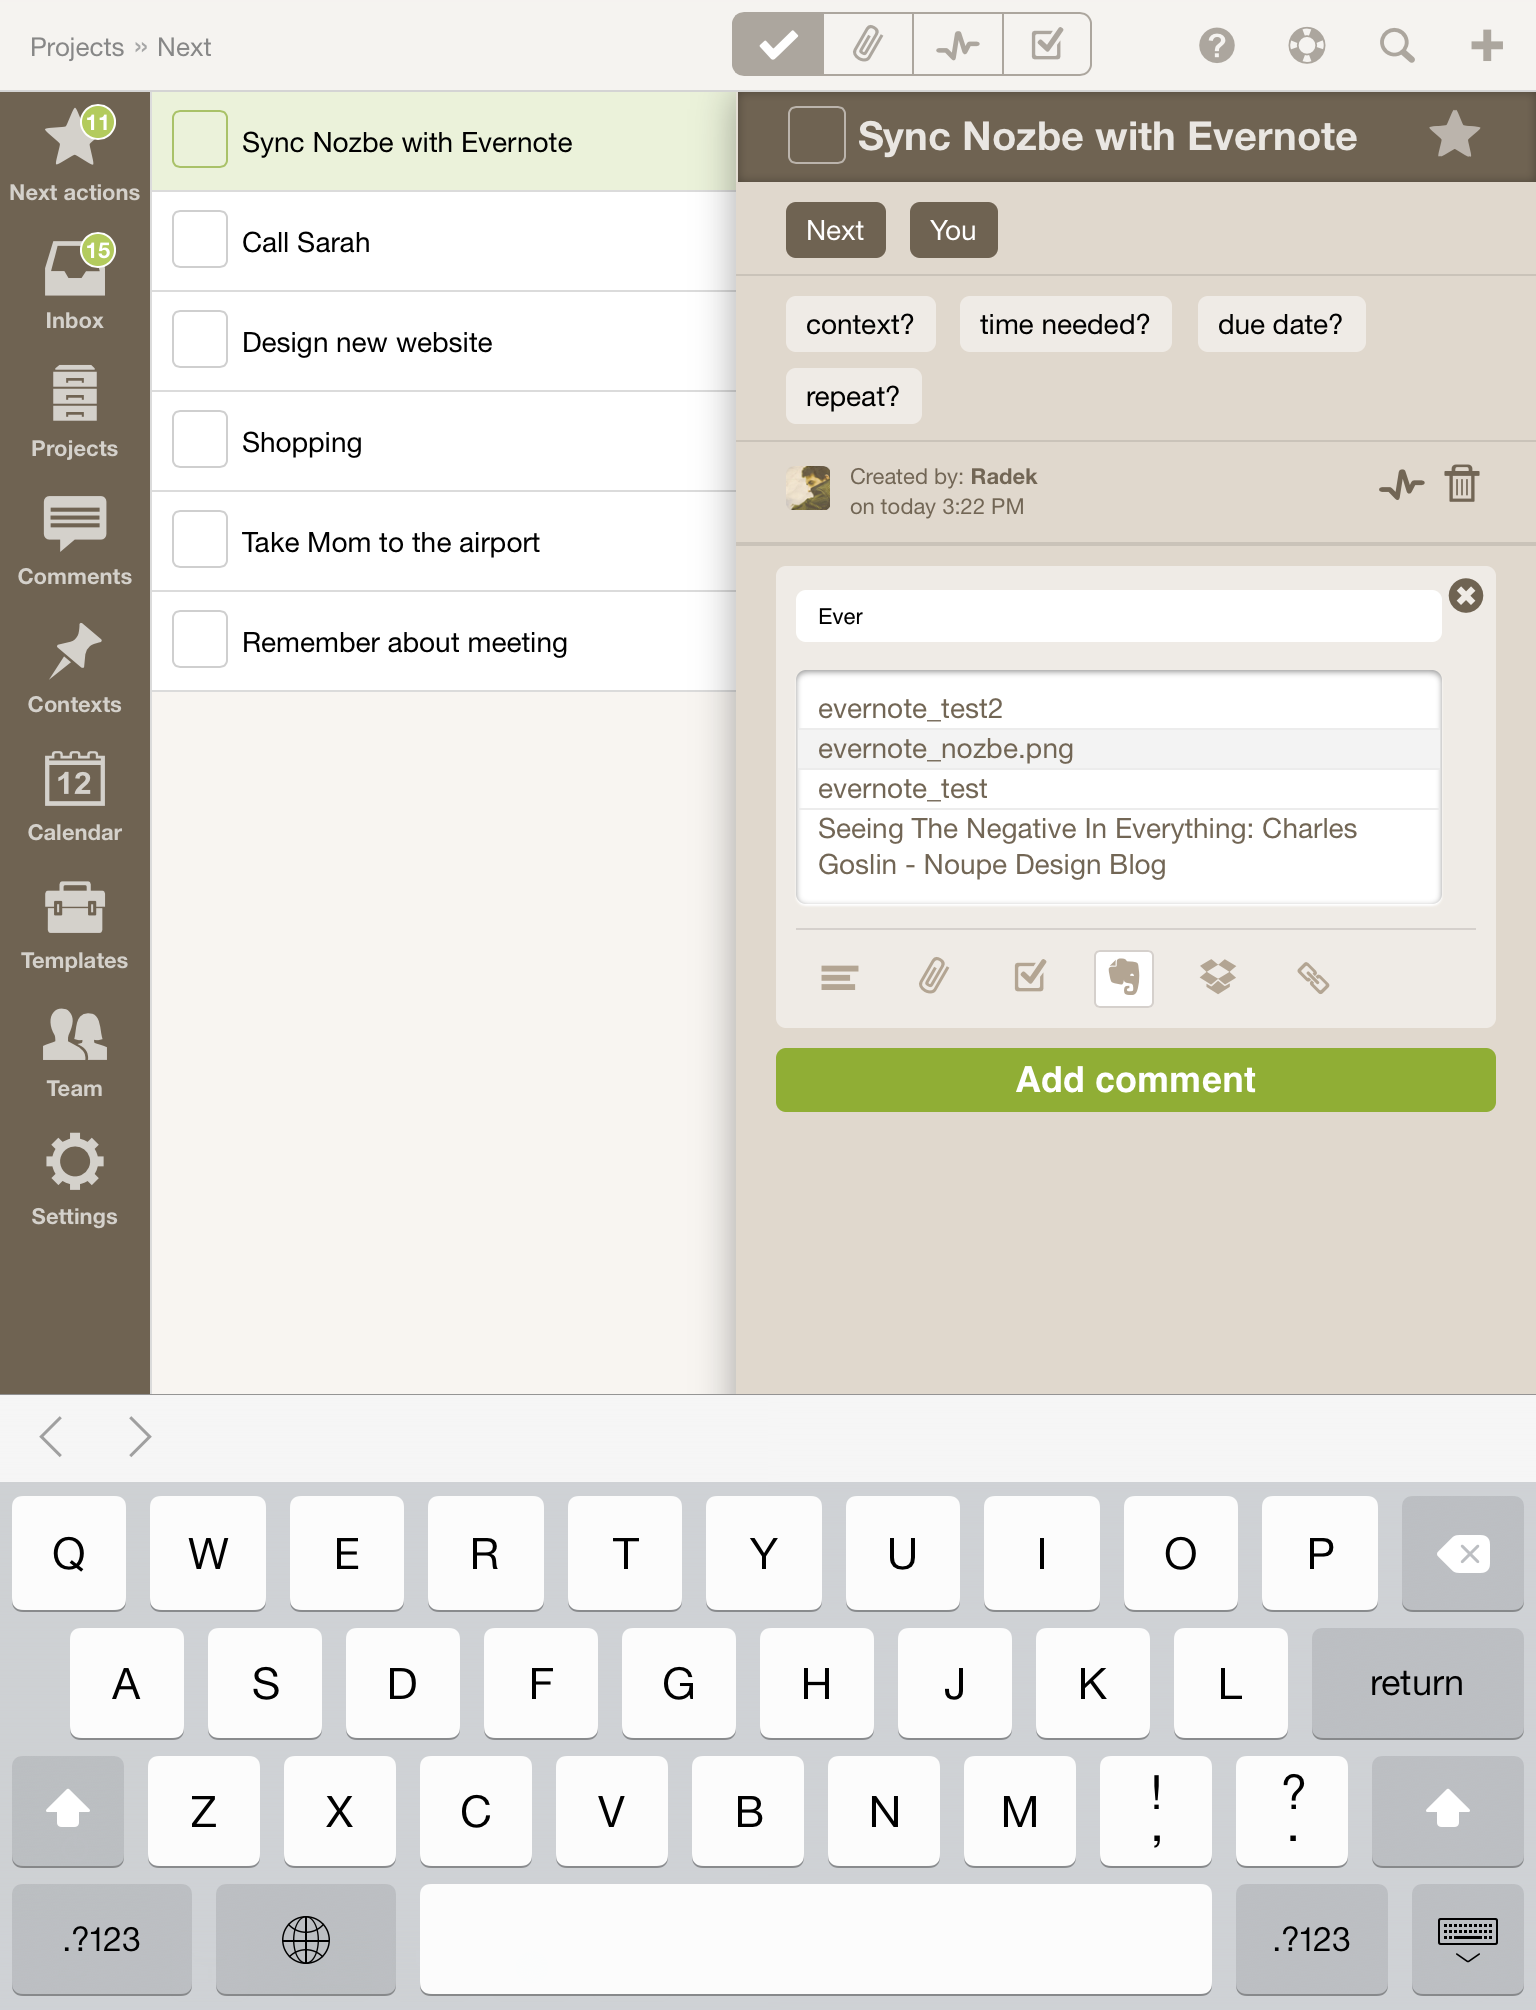 evernote web clipper for android tablet